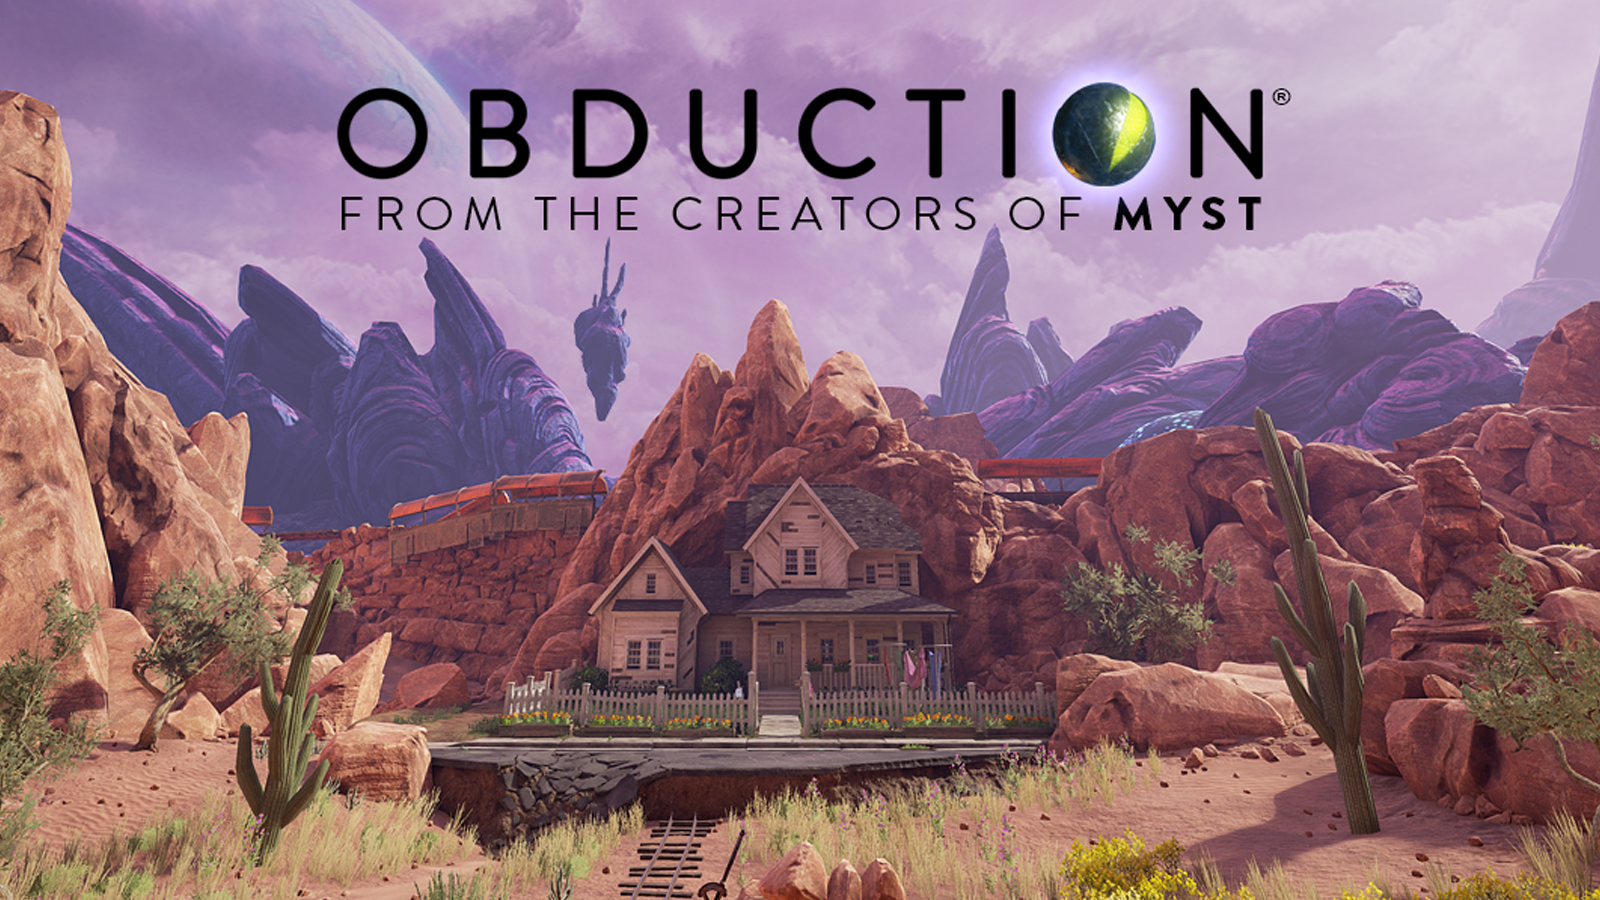 download obduction game